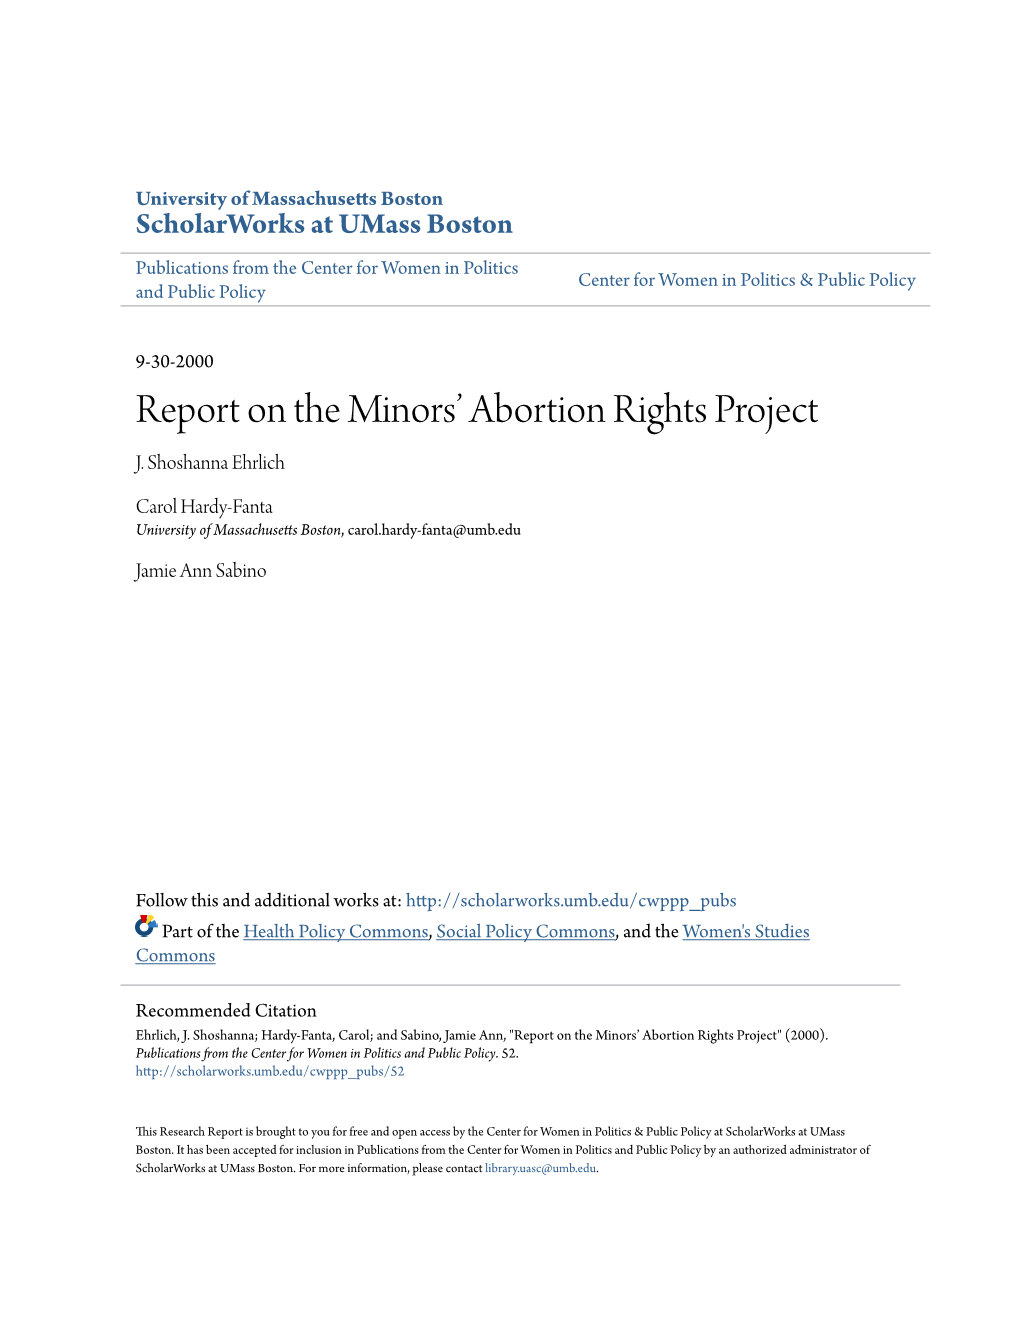 Report on the Minors' Abortion Rights Project